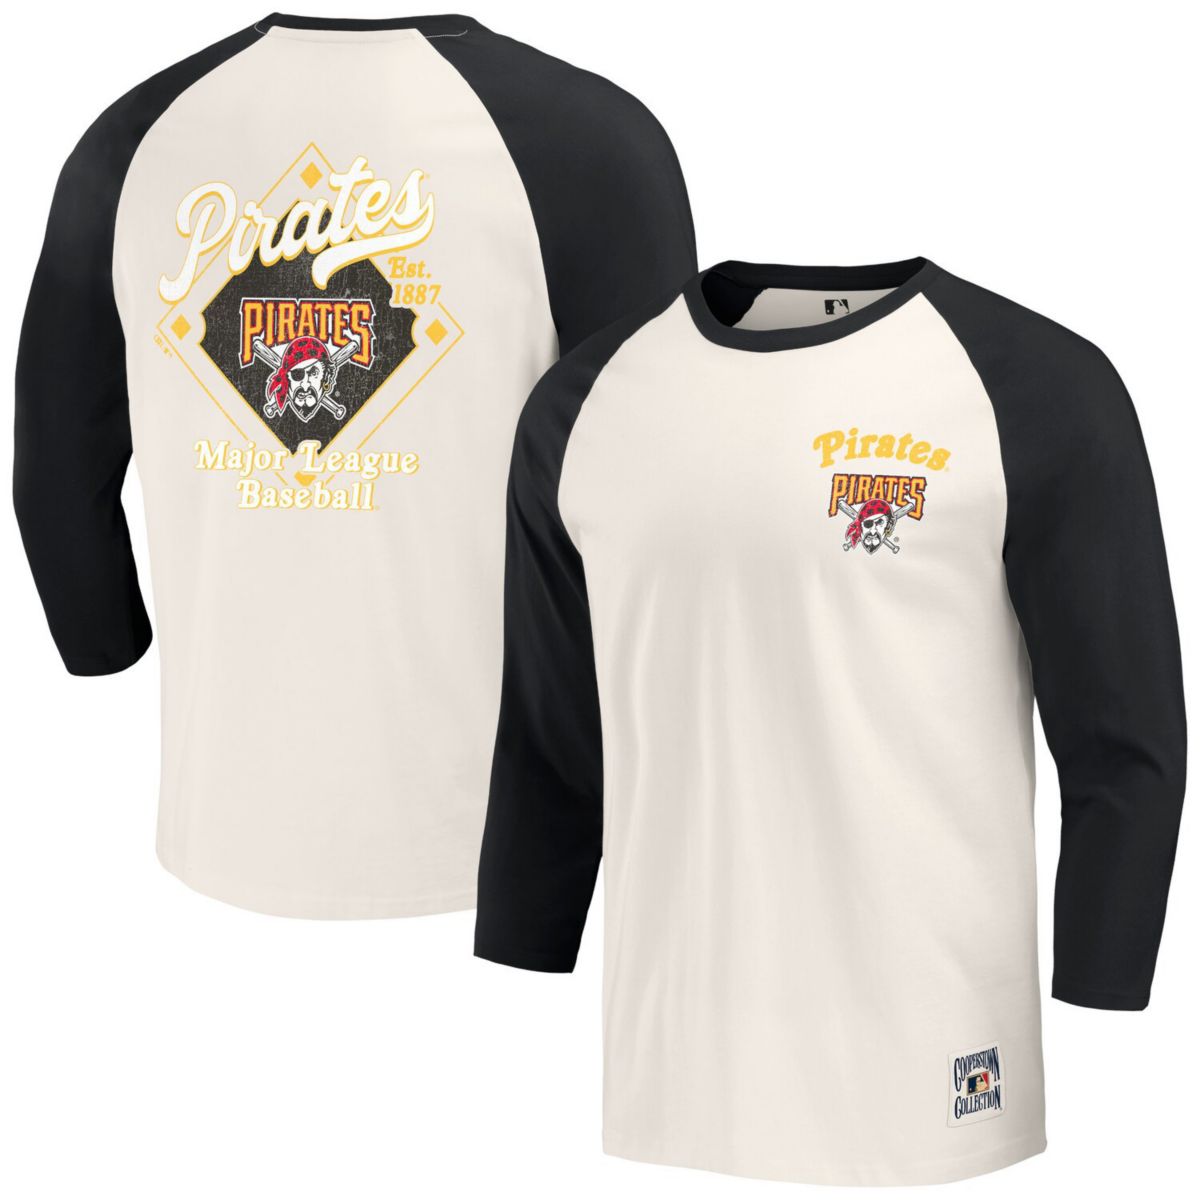 Men's Darius Rucker Collection by Fanatics Black/White Pittsburgh Pirates Cooperstown Collection Raglan 3/4-Sleeve T-Shirt Darius Rucker Collection by Fanatics